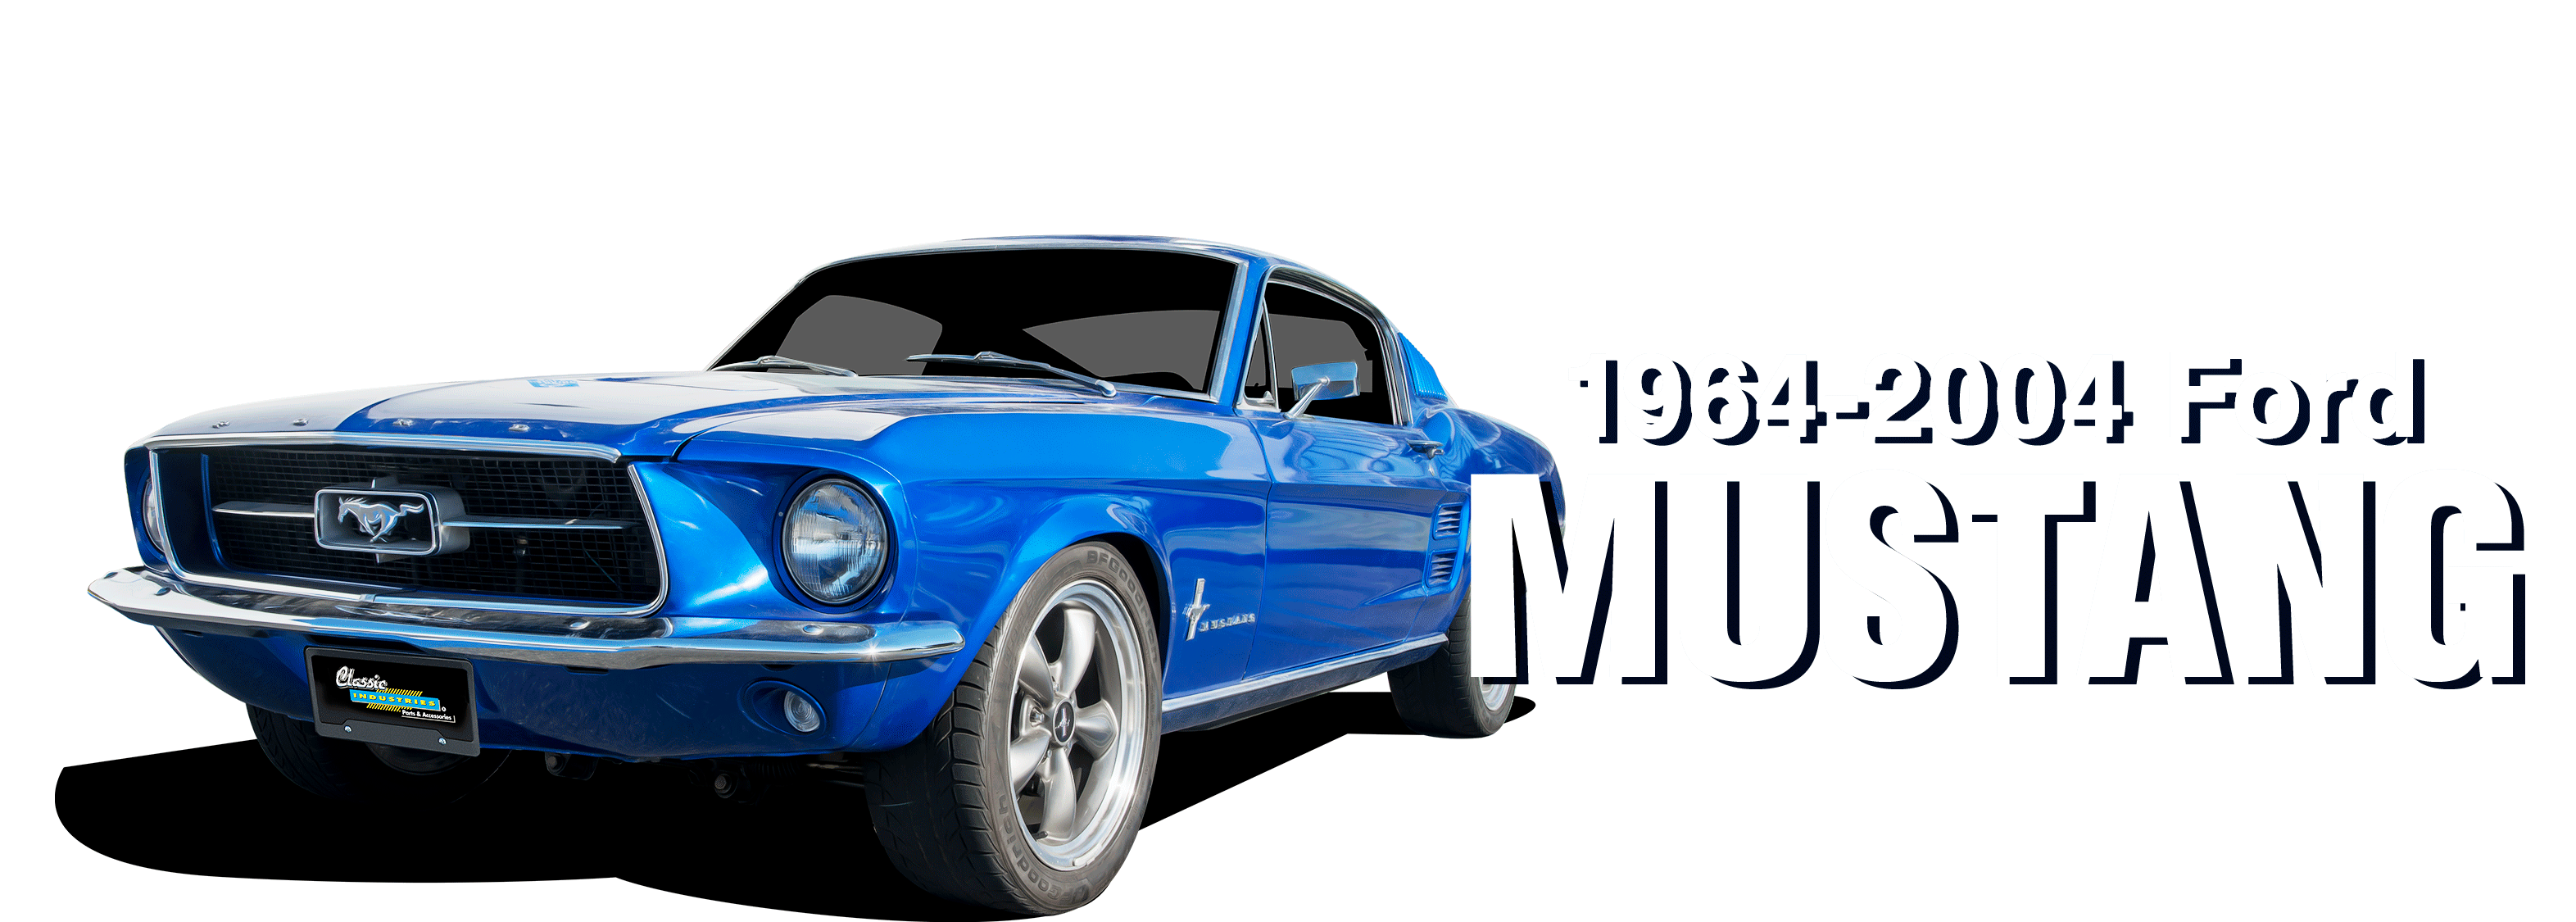 https://shop.classicindustries.com/hs-fs/hubfs/Classic_Industries/Production_Landing_Assets/headers-1200x330/Clean%20Theme/Ford/Ford%20Mustang/Ford-Mustang-vehicle-desktop_v3.png?width=3144&height=1125&name=Ford-Mustang-vehicle-desktop_v3.png